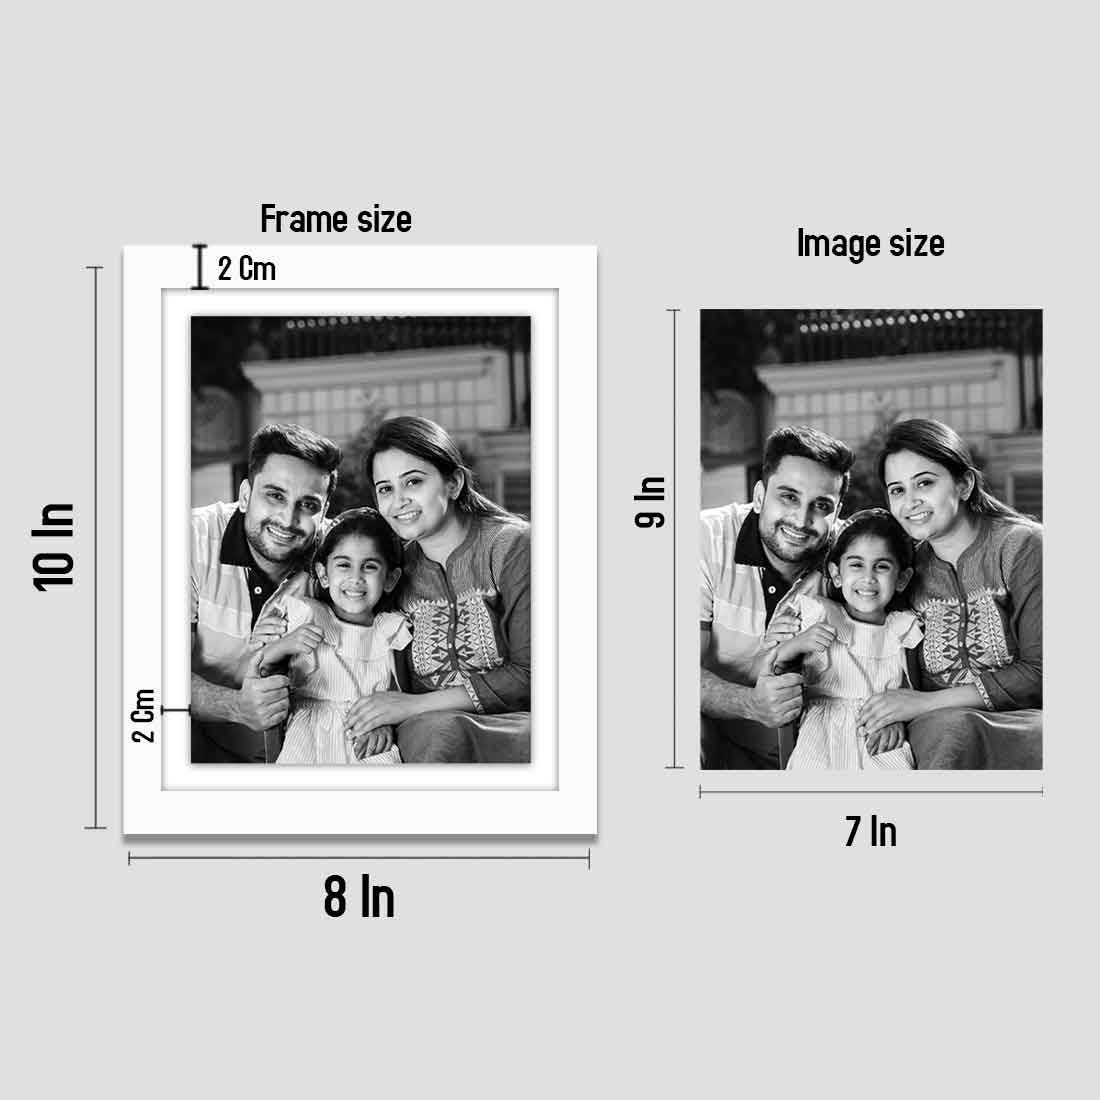 Black and White Wall Frames Customized Photo Frame Decor 8x10 inch (Set of 9)